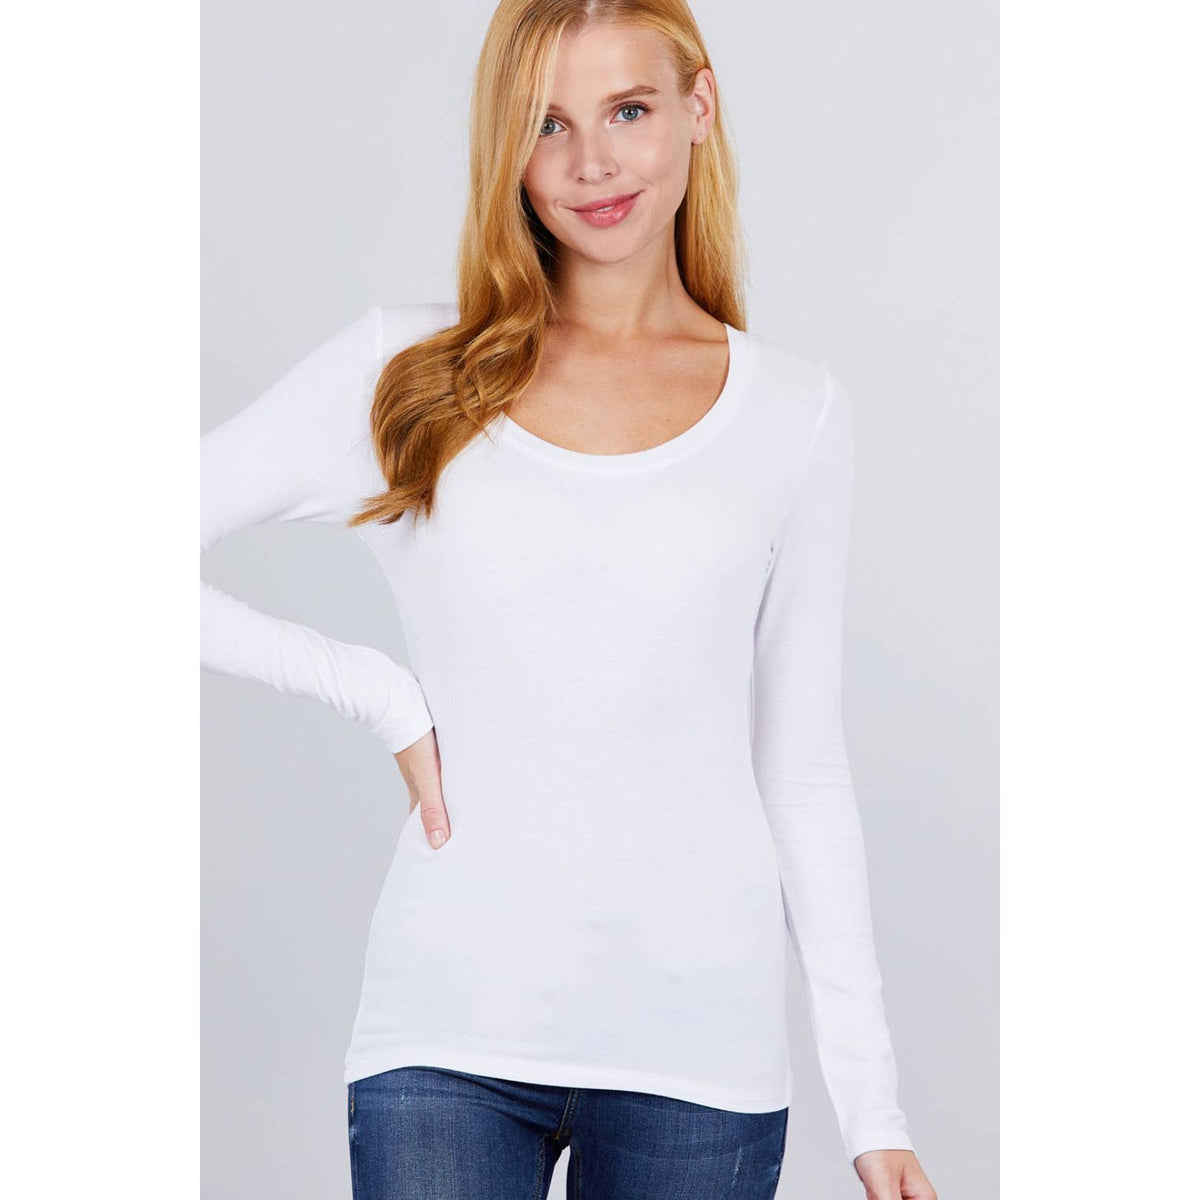 White scoop neck tight fitting long sleeve shirt; womens clothing.